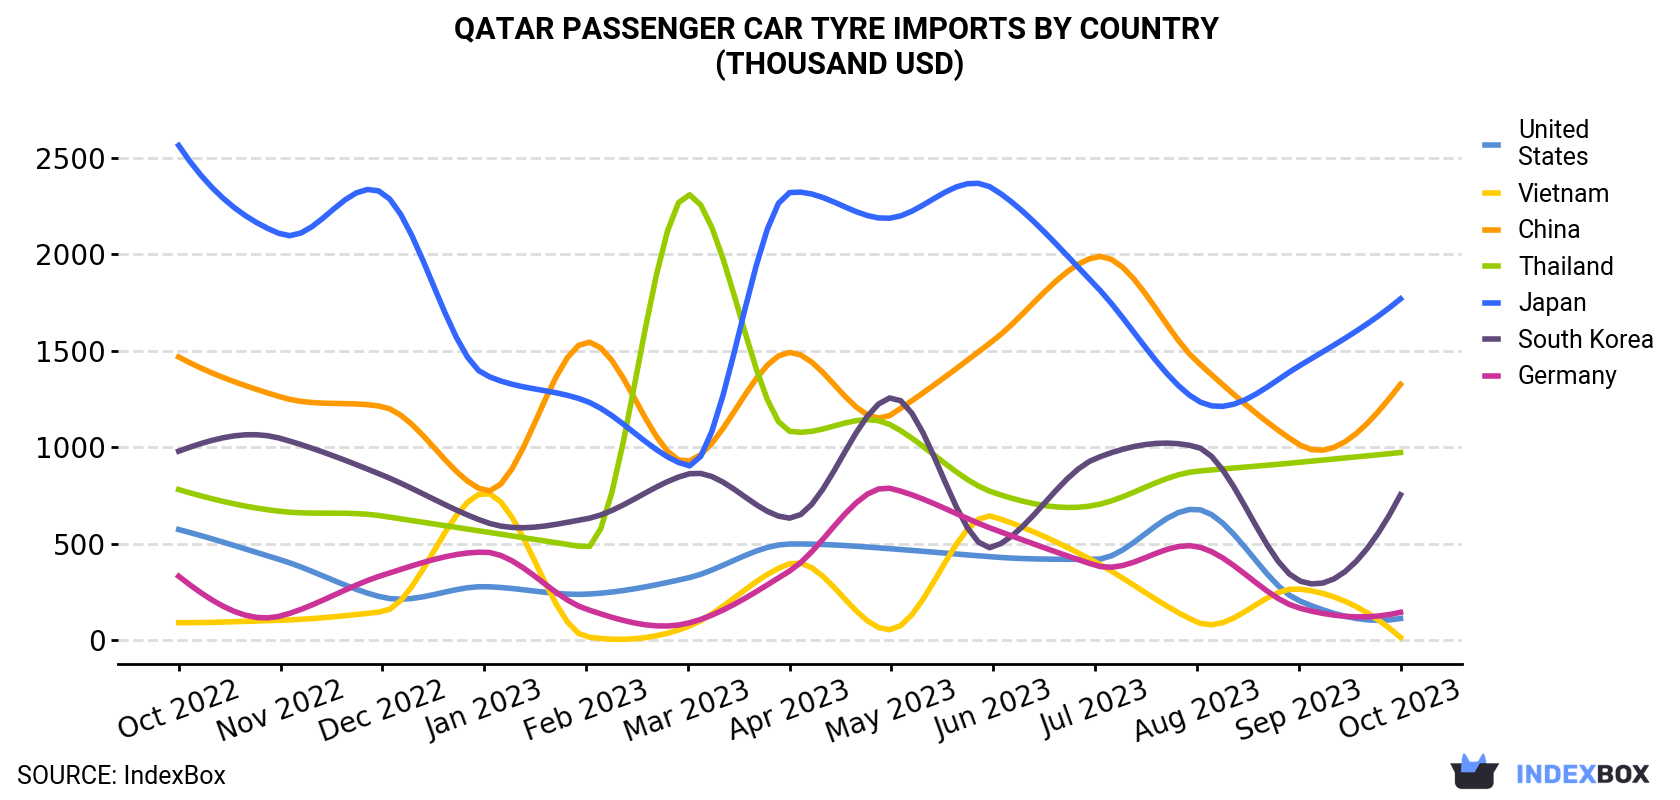 Qatar Passenger Car Tyre Imports By Country (Thousand USD)